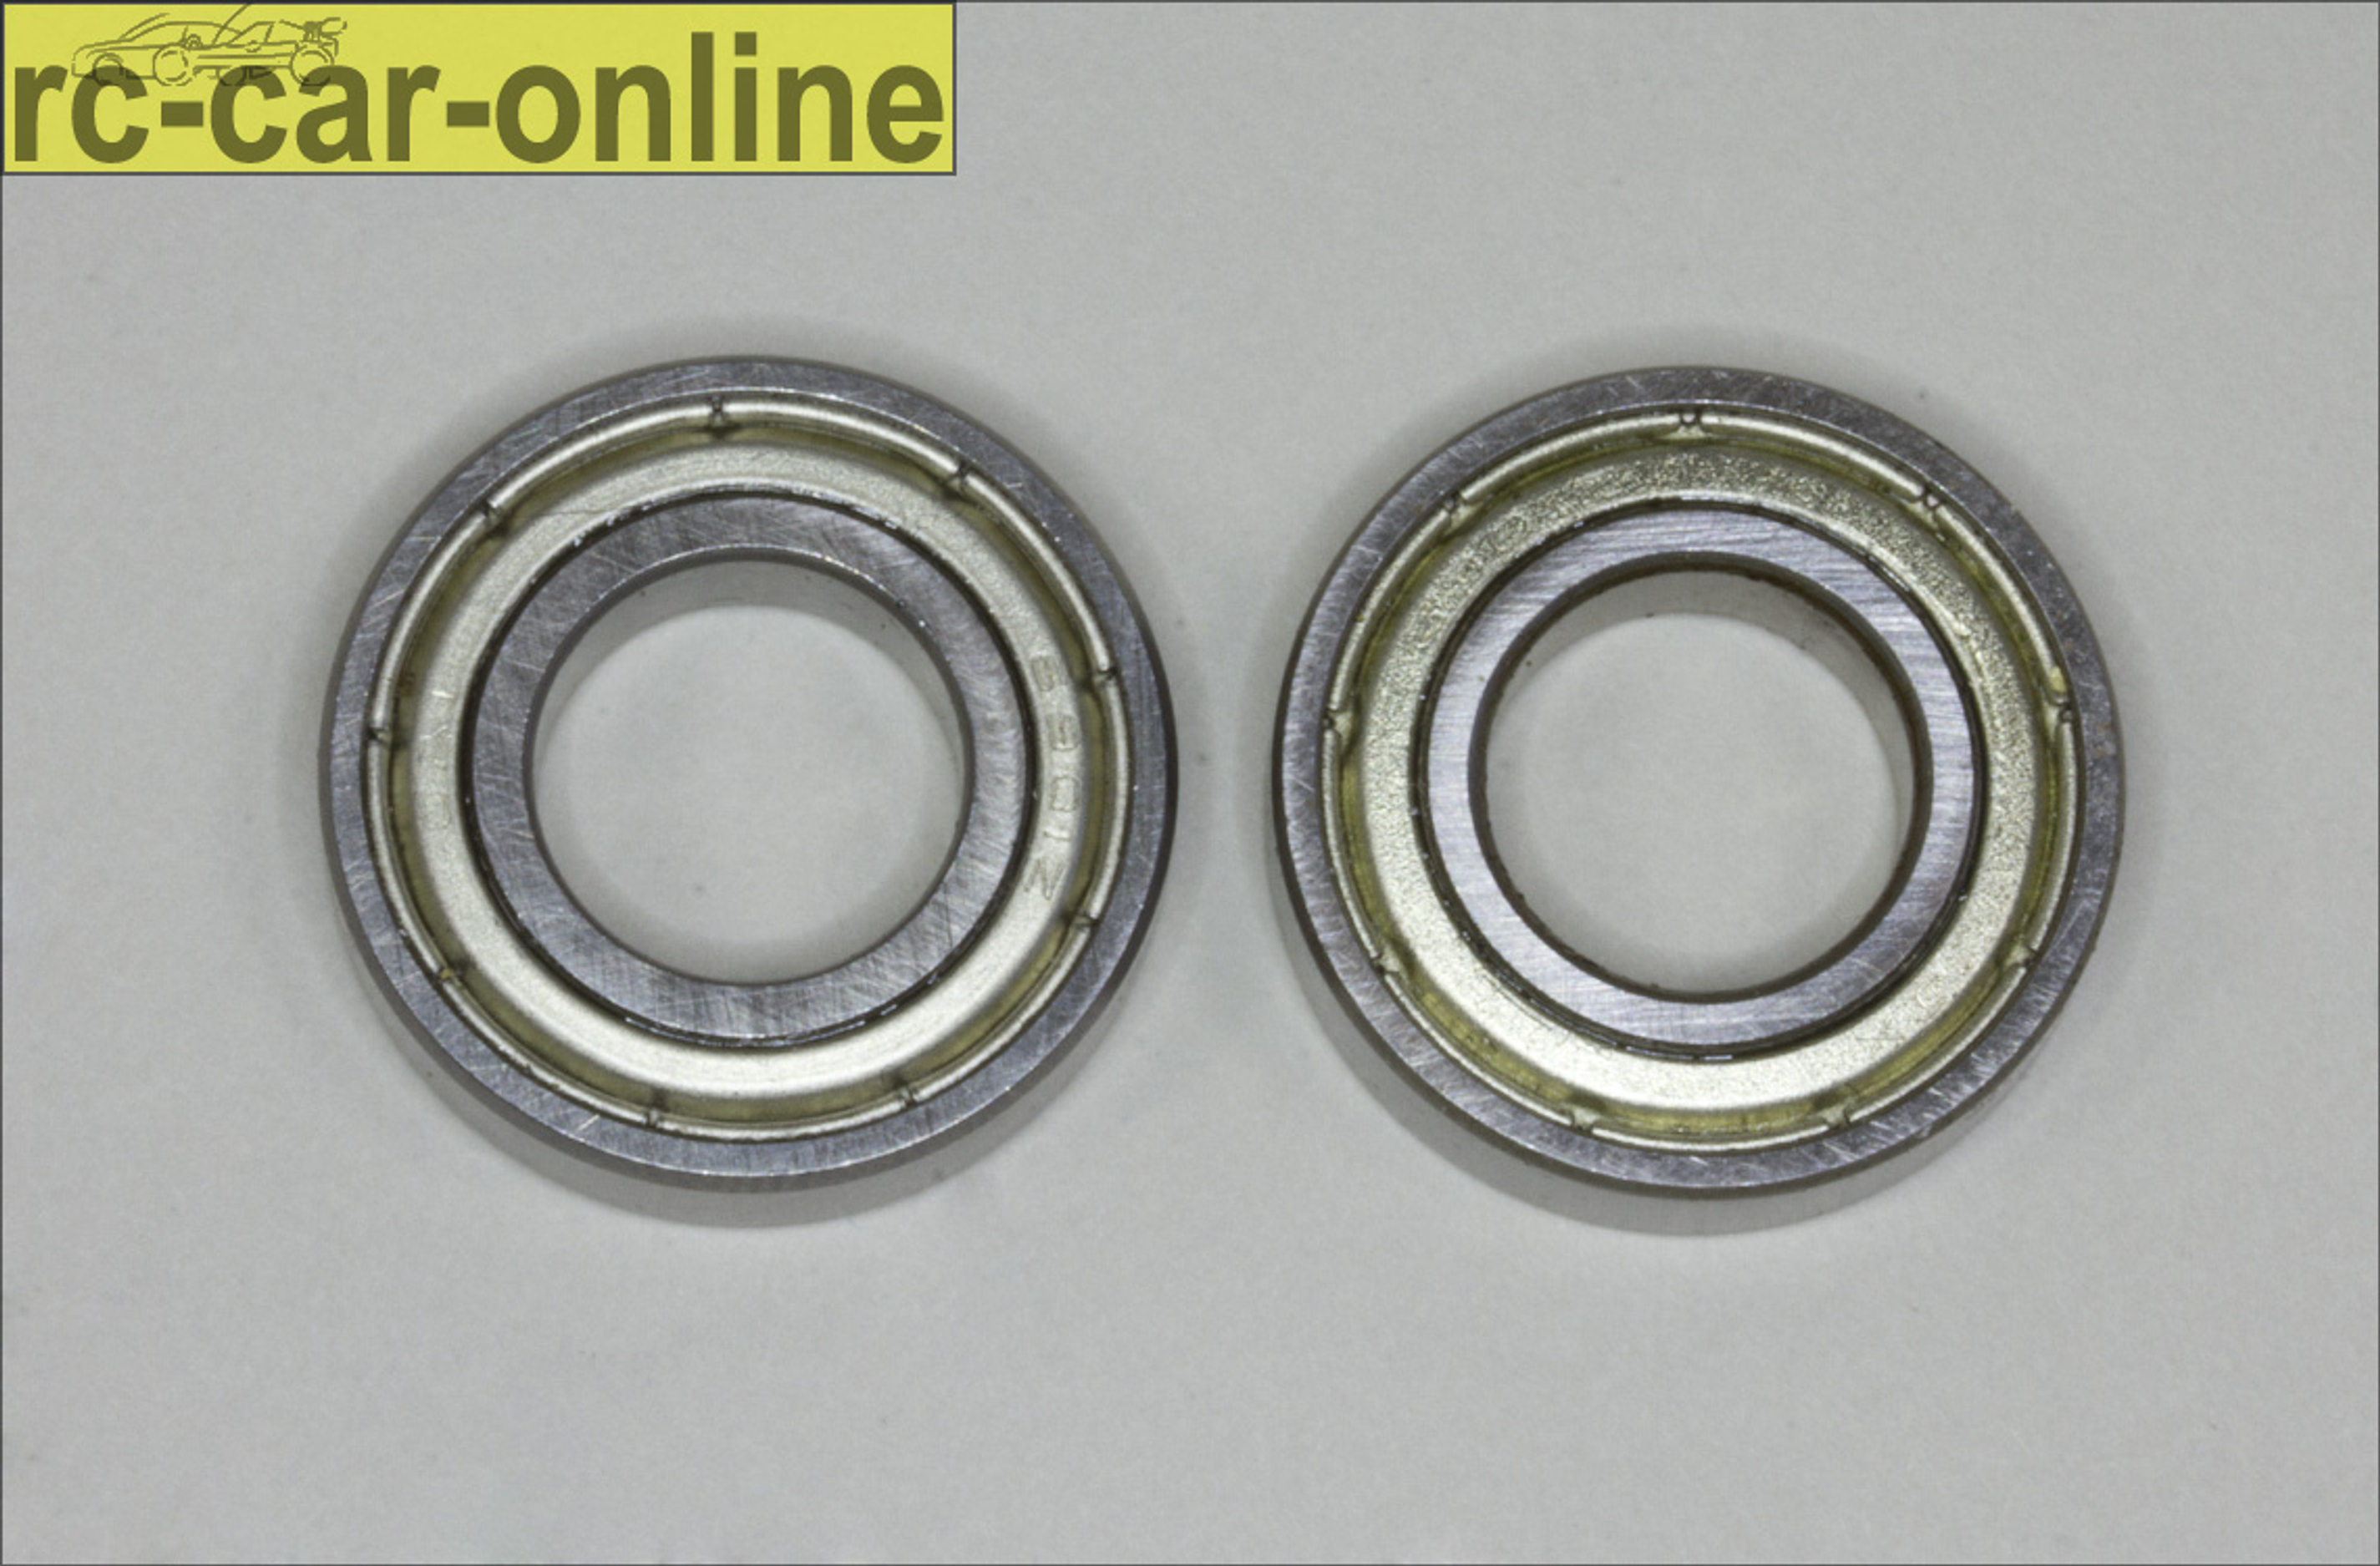 LOSB 5972/01 Outer Axle Ball Bearings, 12 x 24 x 6 mm, Losi 5ive-T/2.0, TLR 5ive-B and Mini WRC.